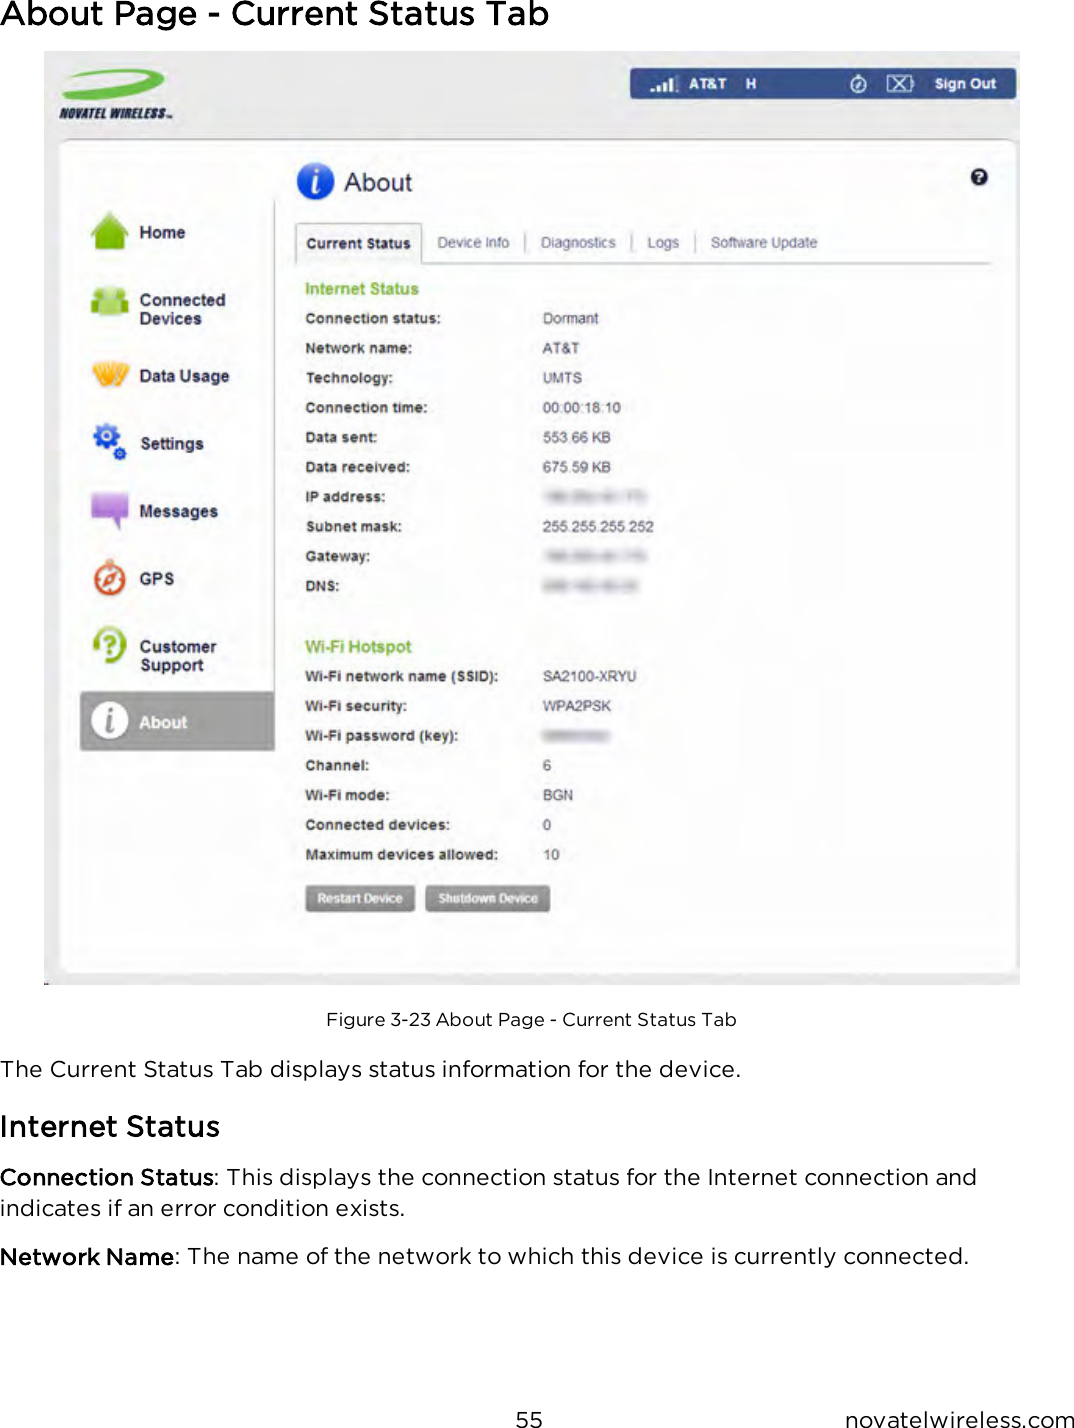 55 novatelwireless.comAbout Page - Current Status TabFigure 3-23 About Page - Current Status TabThe Current Status Tab displays status information for the device.Internet StatusConnection Status: This displays the connection status for the Internet connection andindicates if an error condition exists.Network Name: The name of the network to which this device is currently connected.